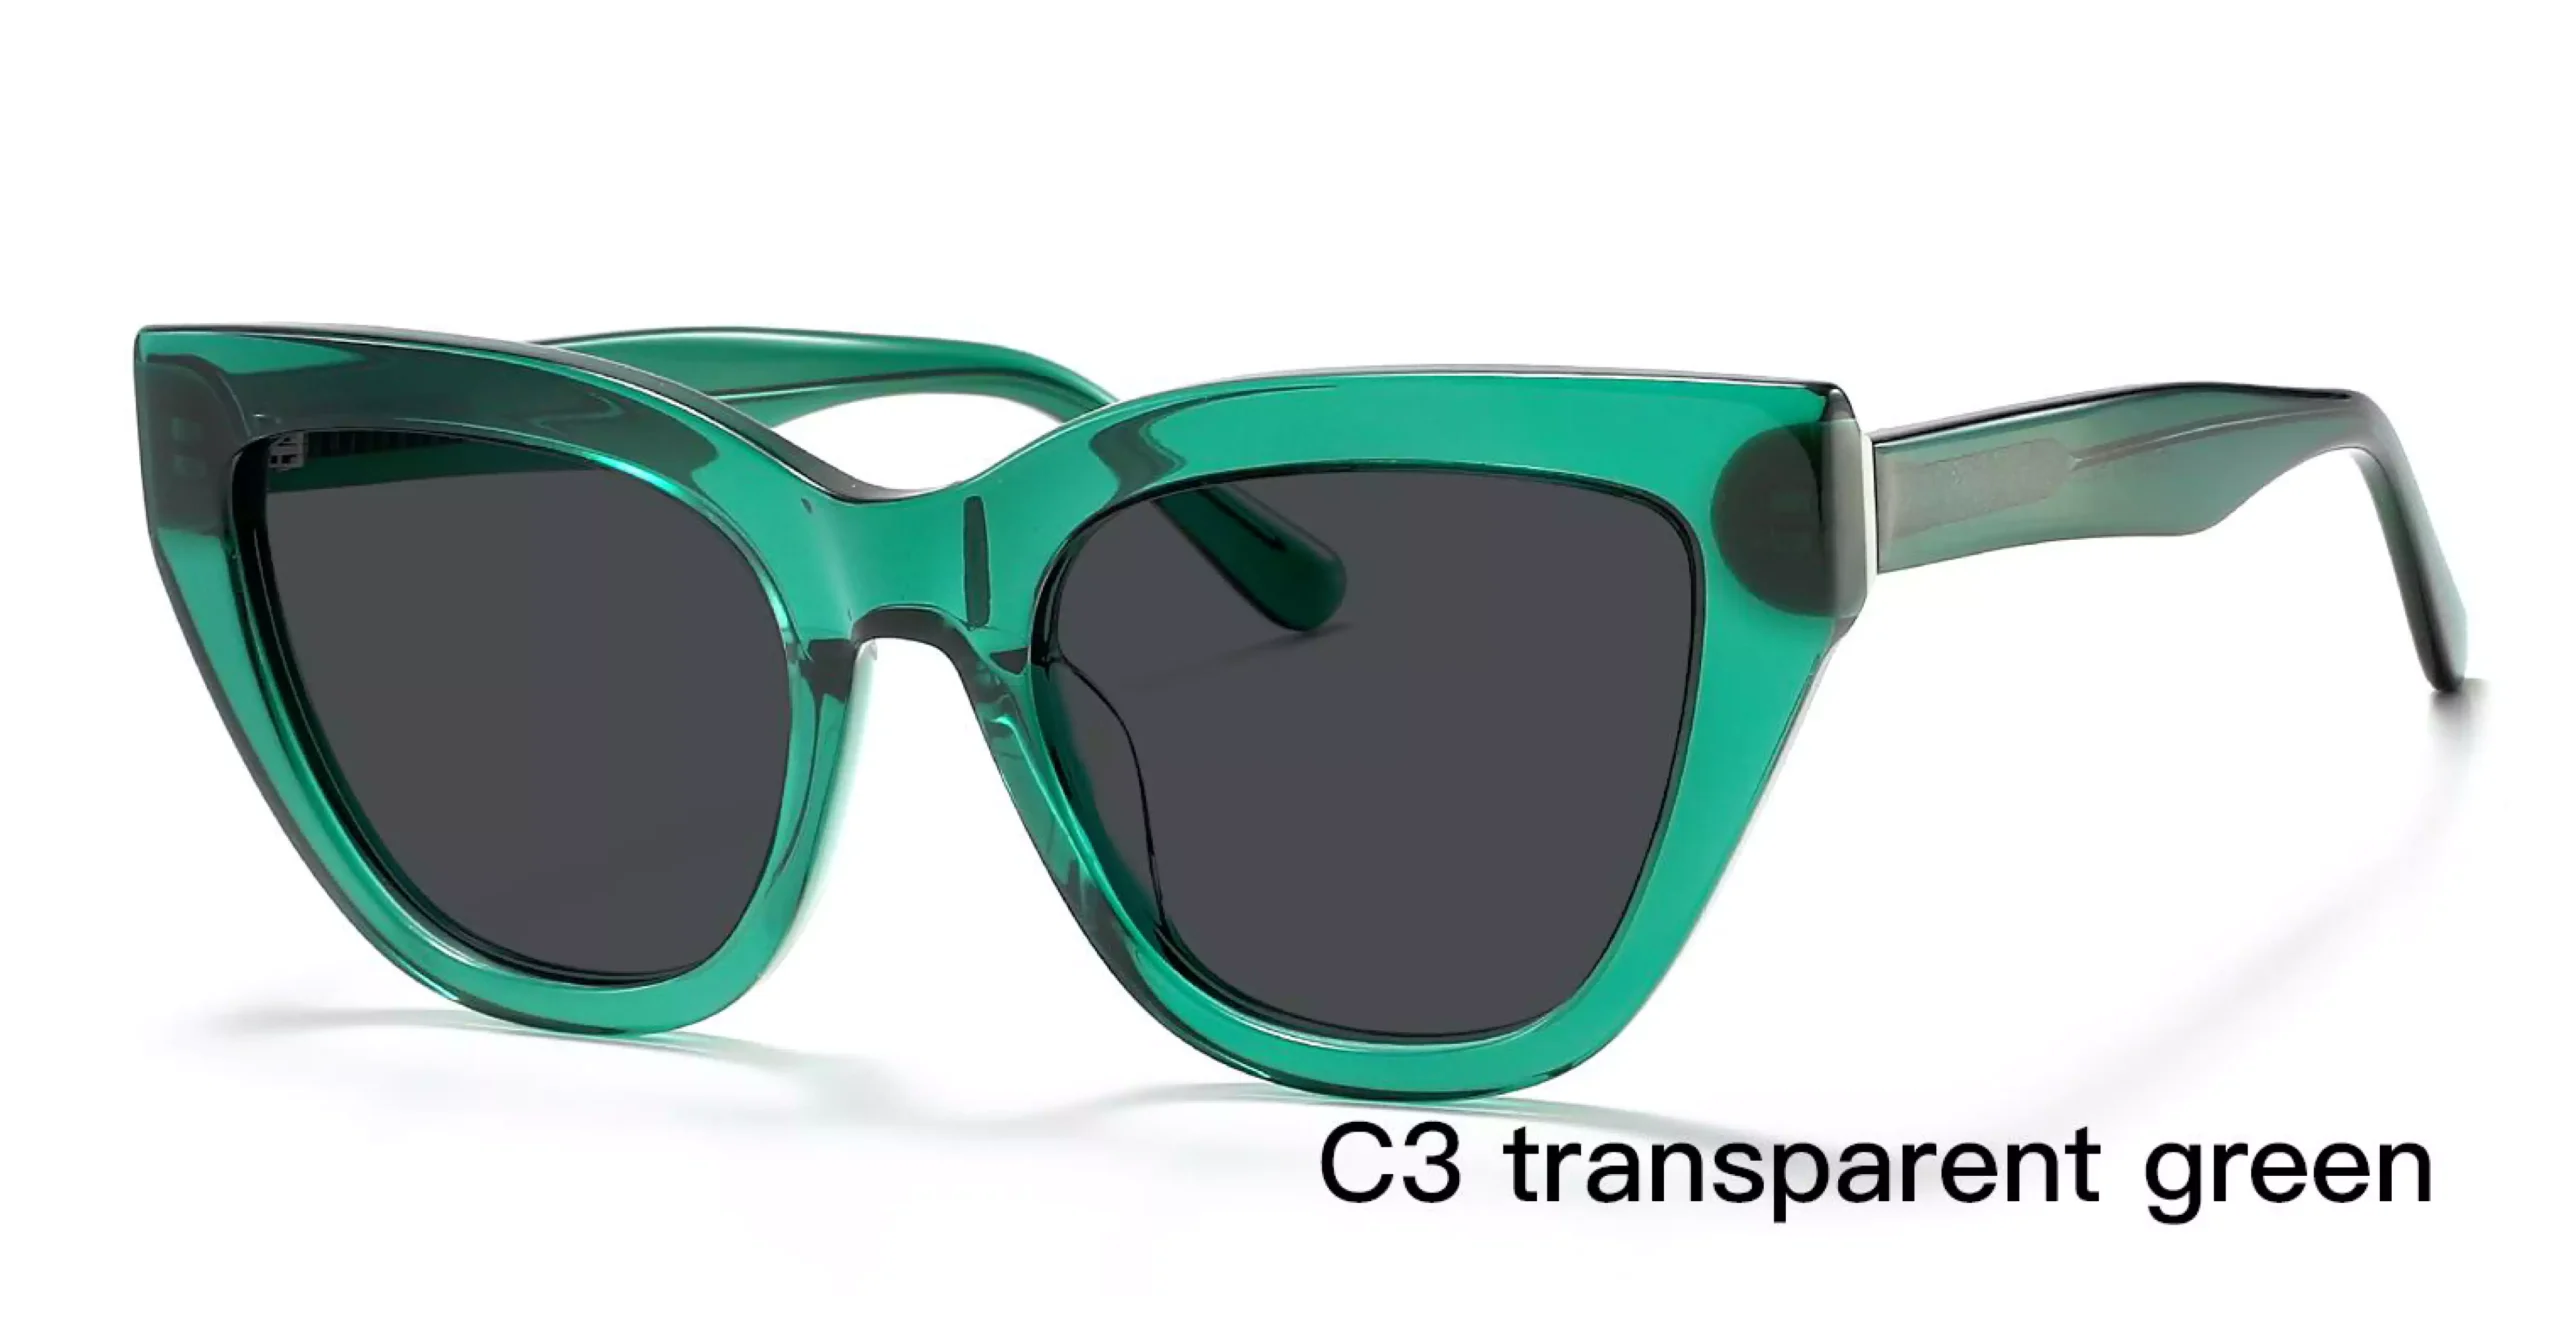 Wholesale Cat Eye Sunglasses, Transparent Green, frosted wire cores, UV protection, care vision, acetate